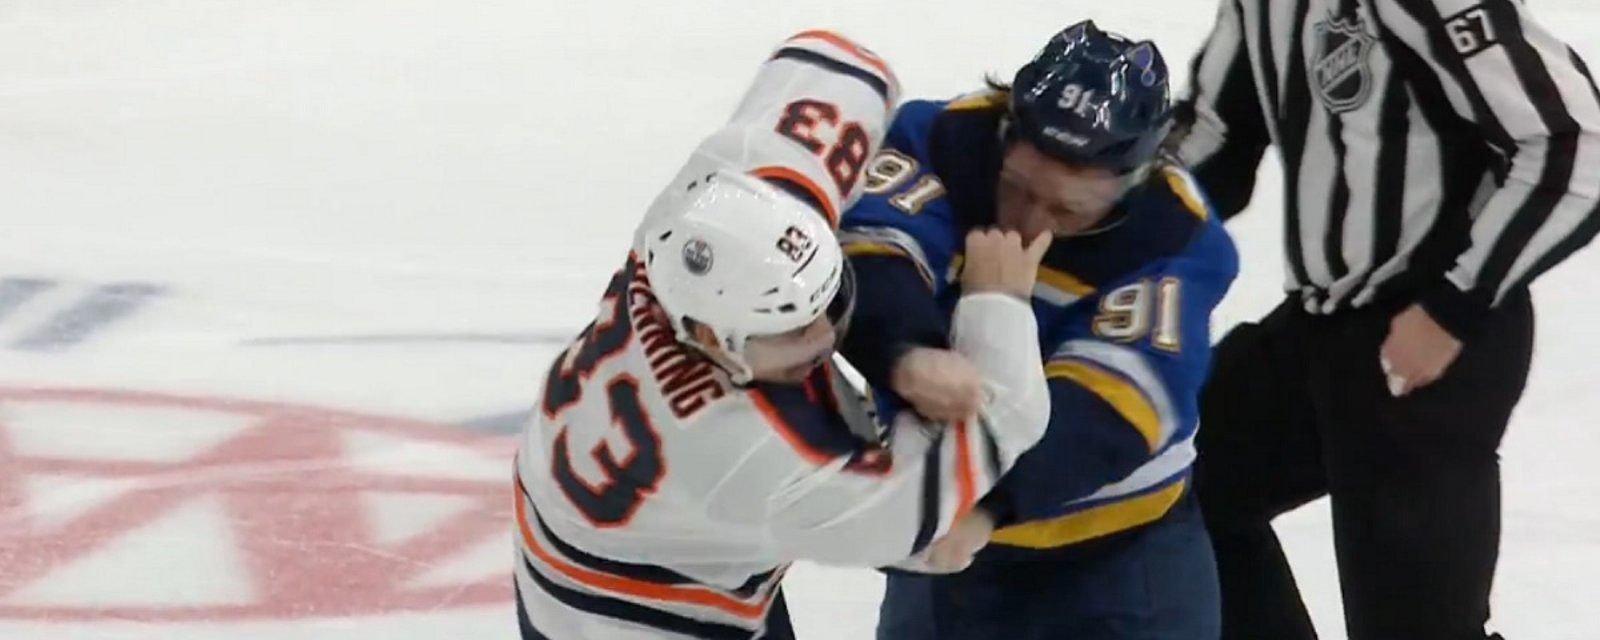 Tarasenko drops the gloves &amp;amp; throws heavy punches in defense of his teammate.